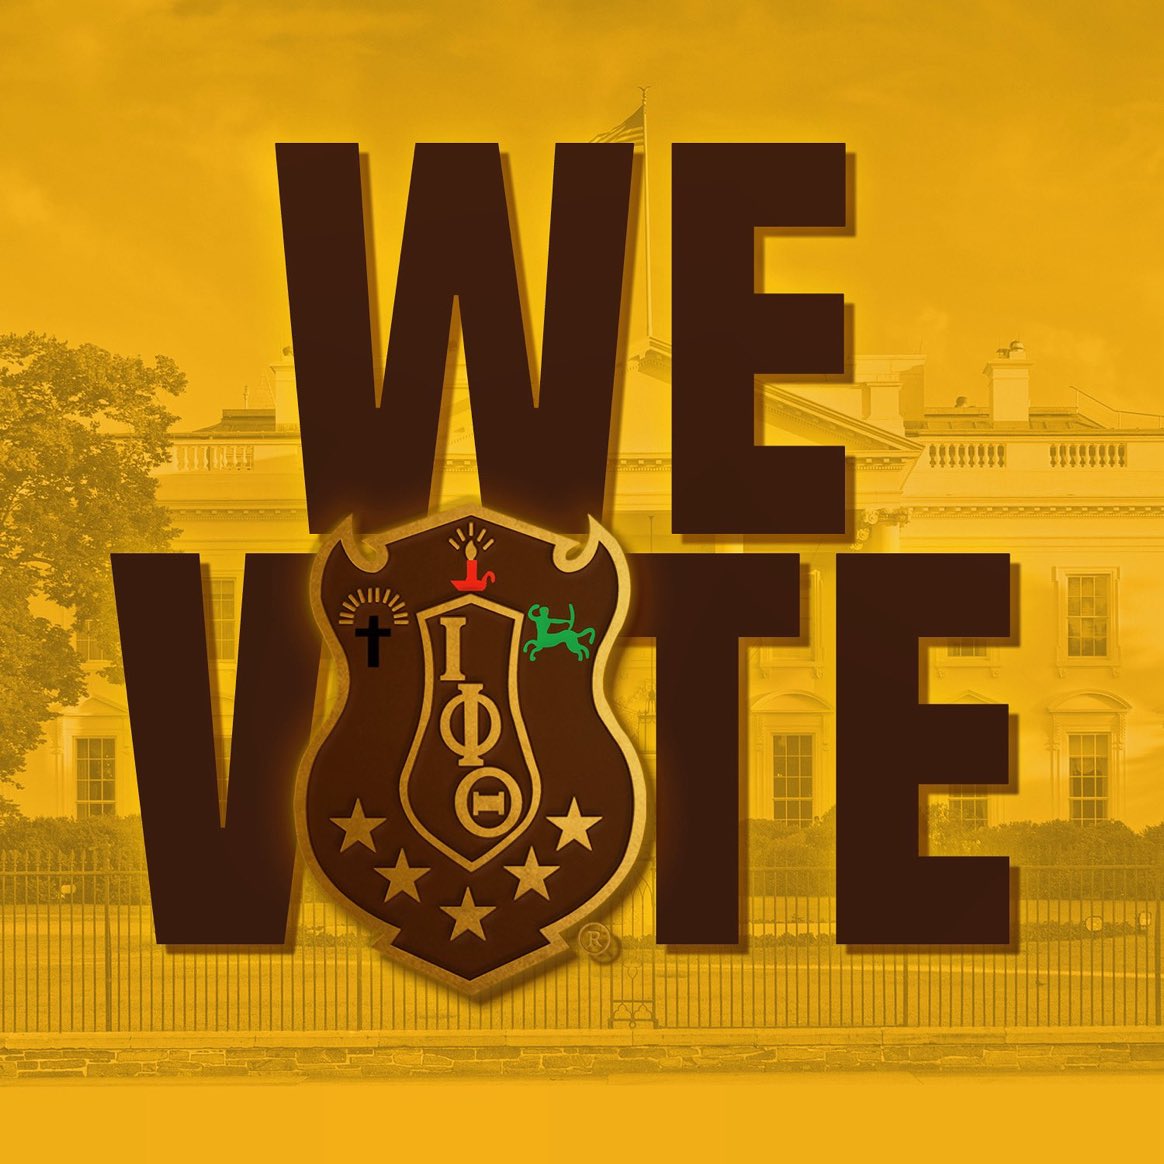 Exercise your rights and get out and vote. #iotaphitheta #ipt1963